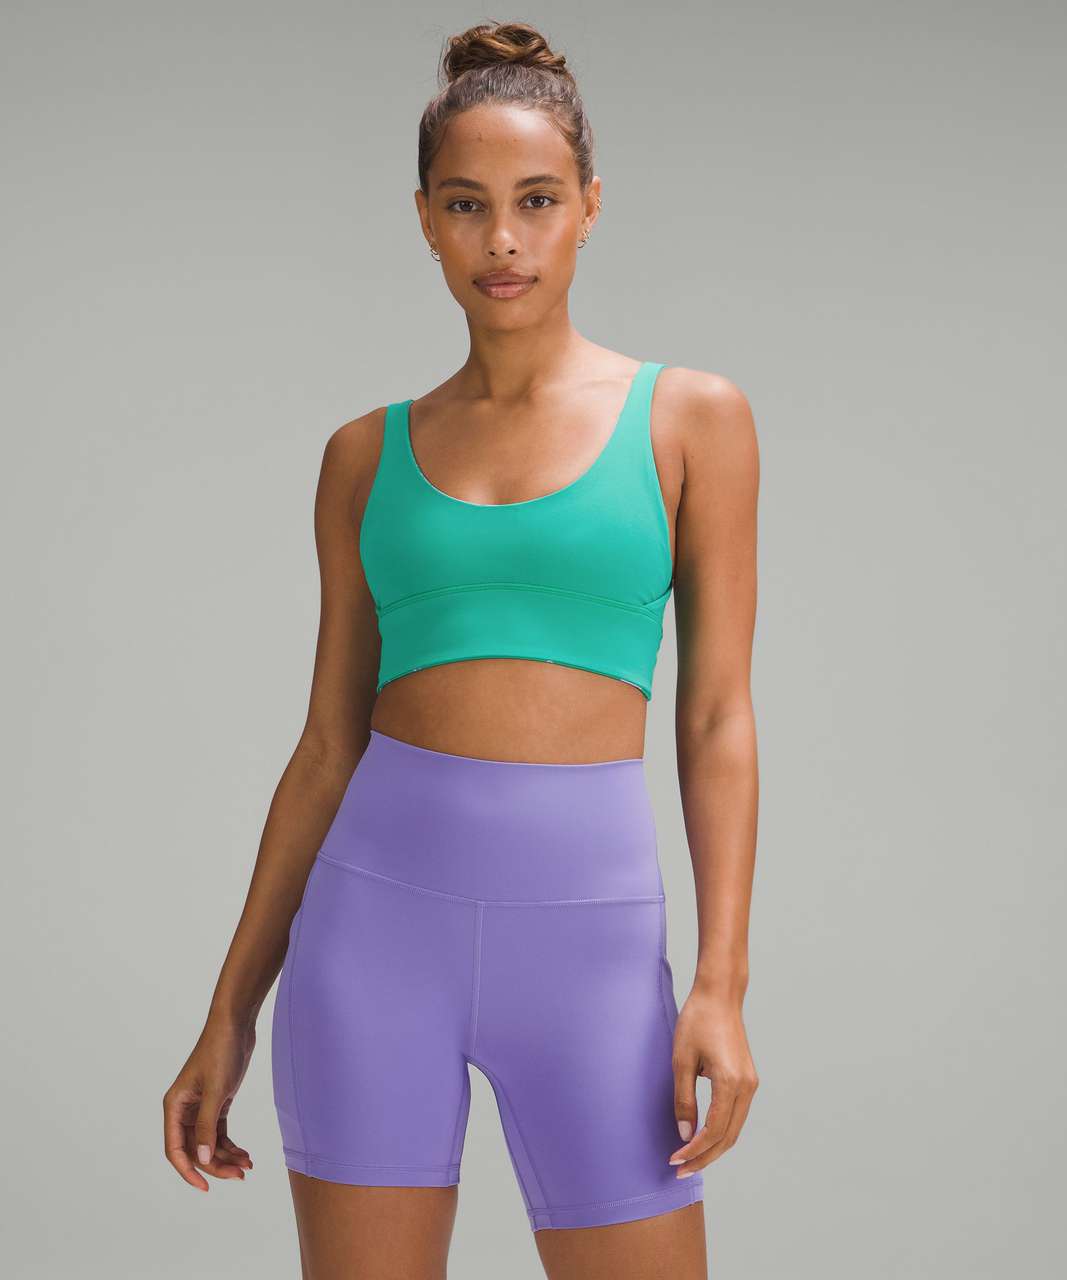 Lululemon Align Bra *Light Support, A/B Cup - BLOSSOM SILHOUETTE MAX Lilac Smoke Kelly Green